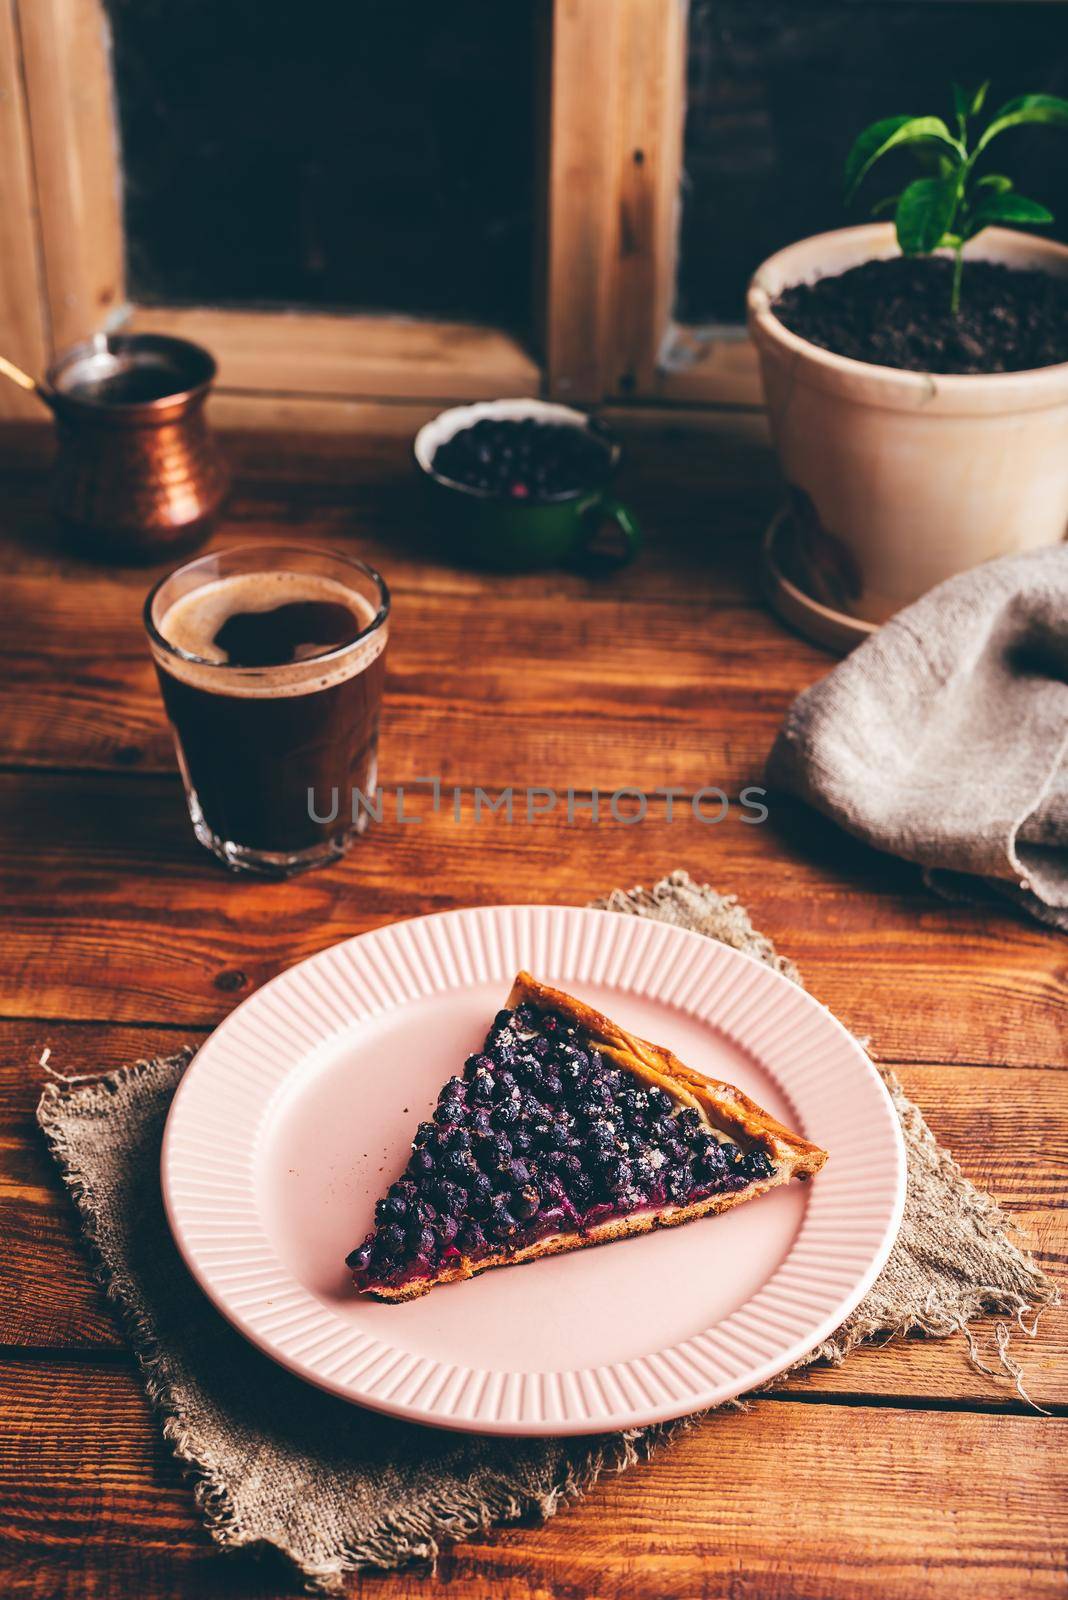 Slice of Fresh Baked Serviceberry Open Pie on Plate and Glass of Turkish Coffee on Wooden Table